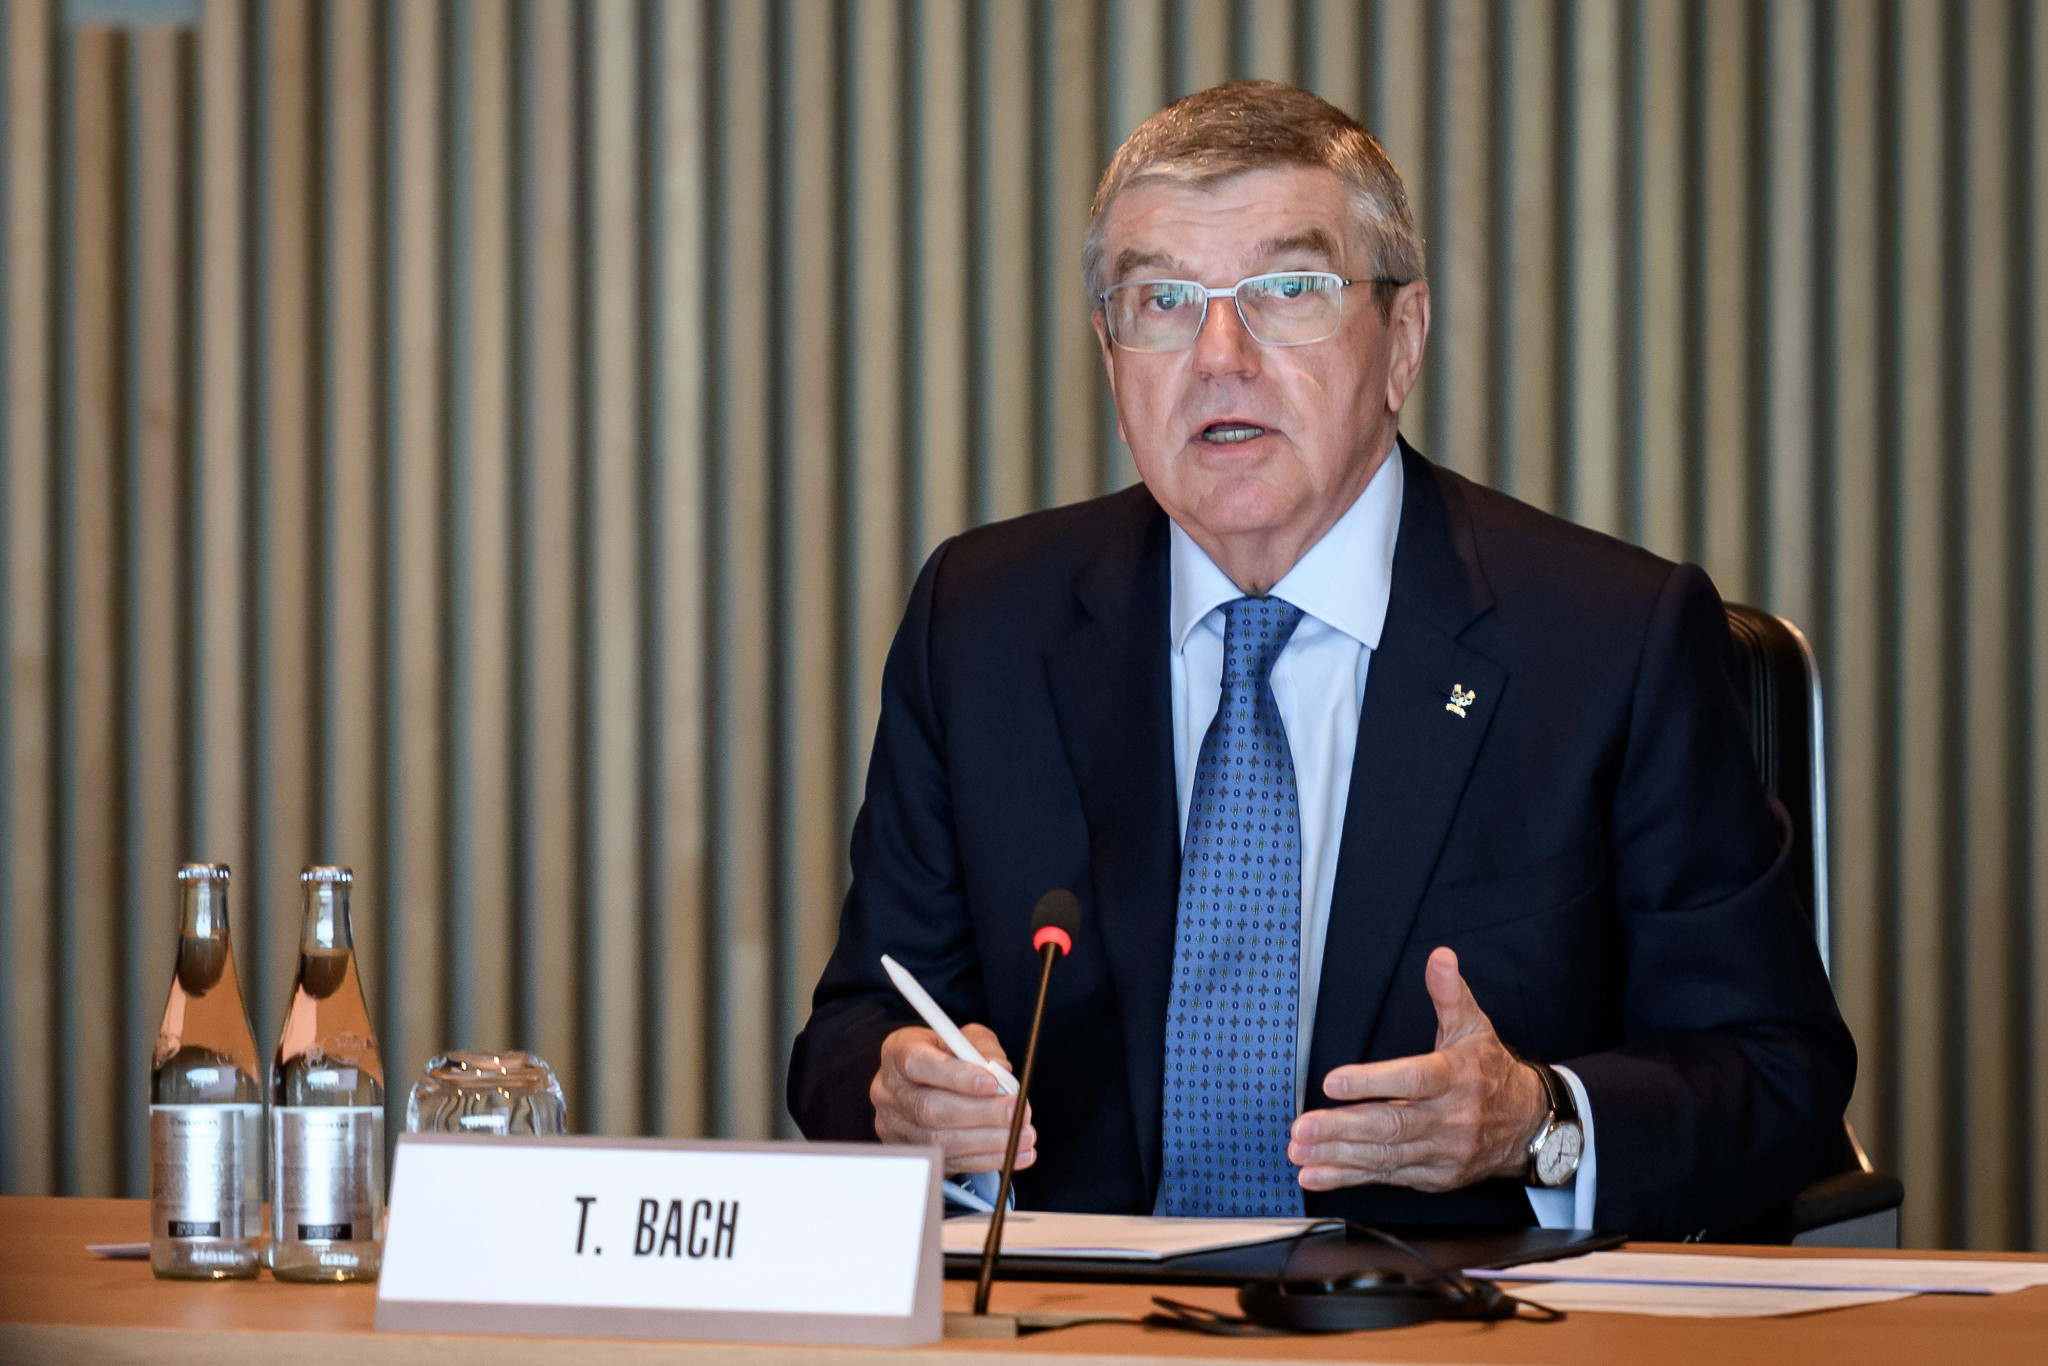 IOC "very worried" over lack of progress on AIBA governance reforms